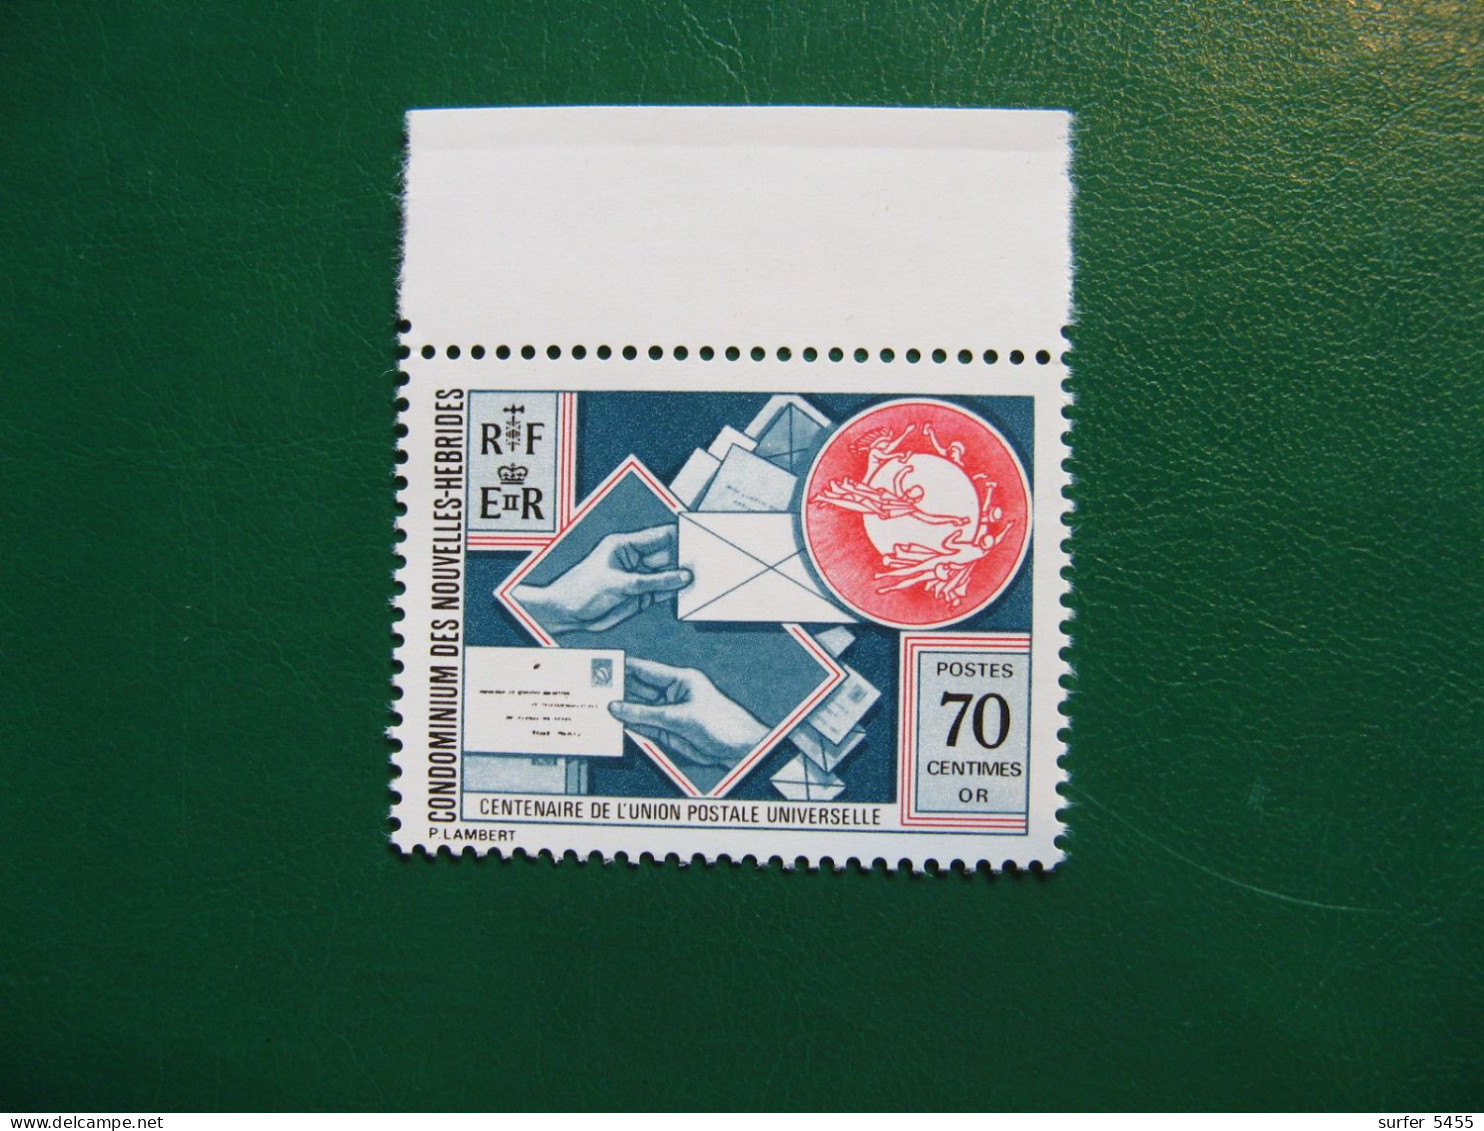 NOUVELLES HEBRIDES POSTE ORDINAIRE N° 402 TIMBRE NEUF** LUXE COTE 1,50 EURO - Unused Stamps